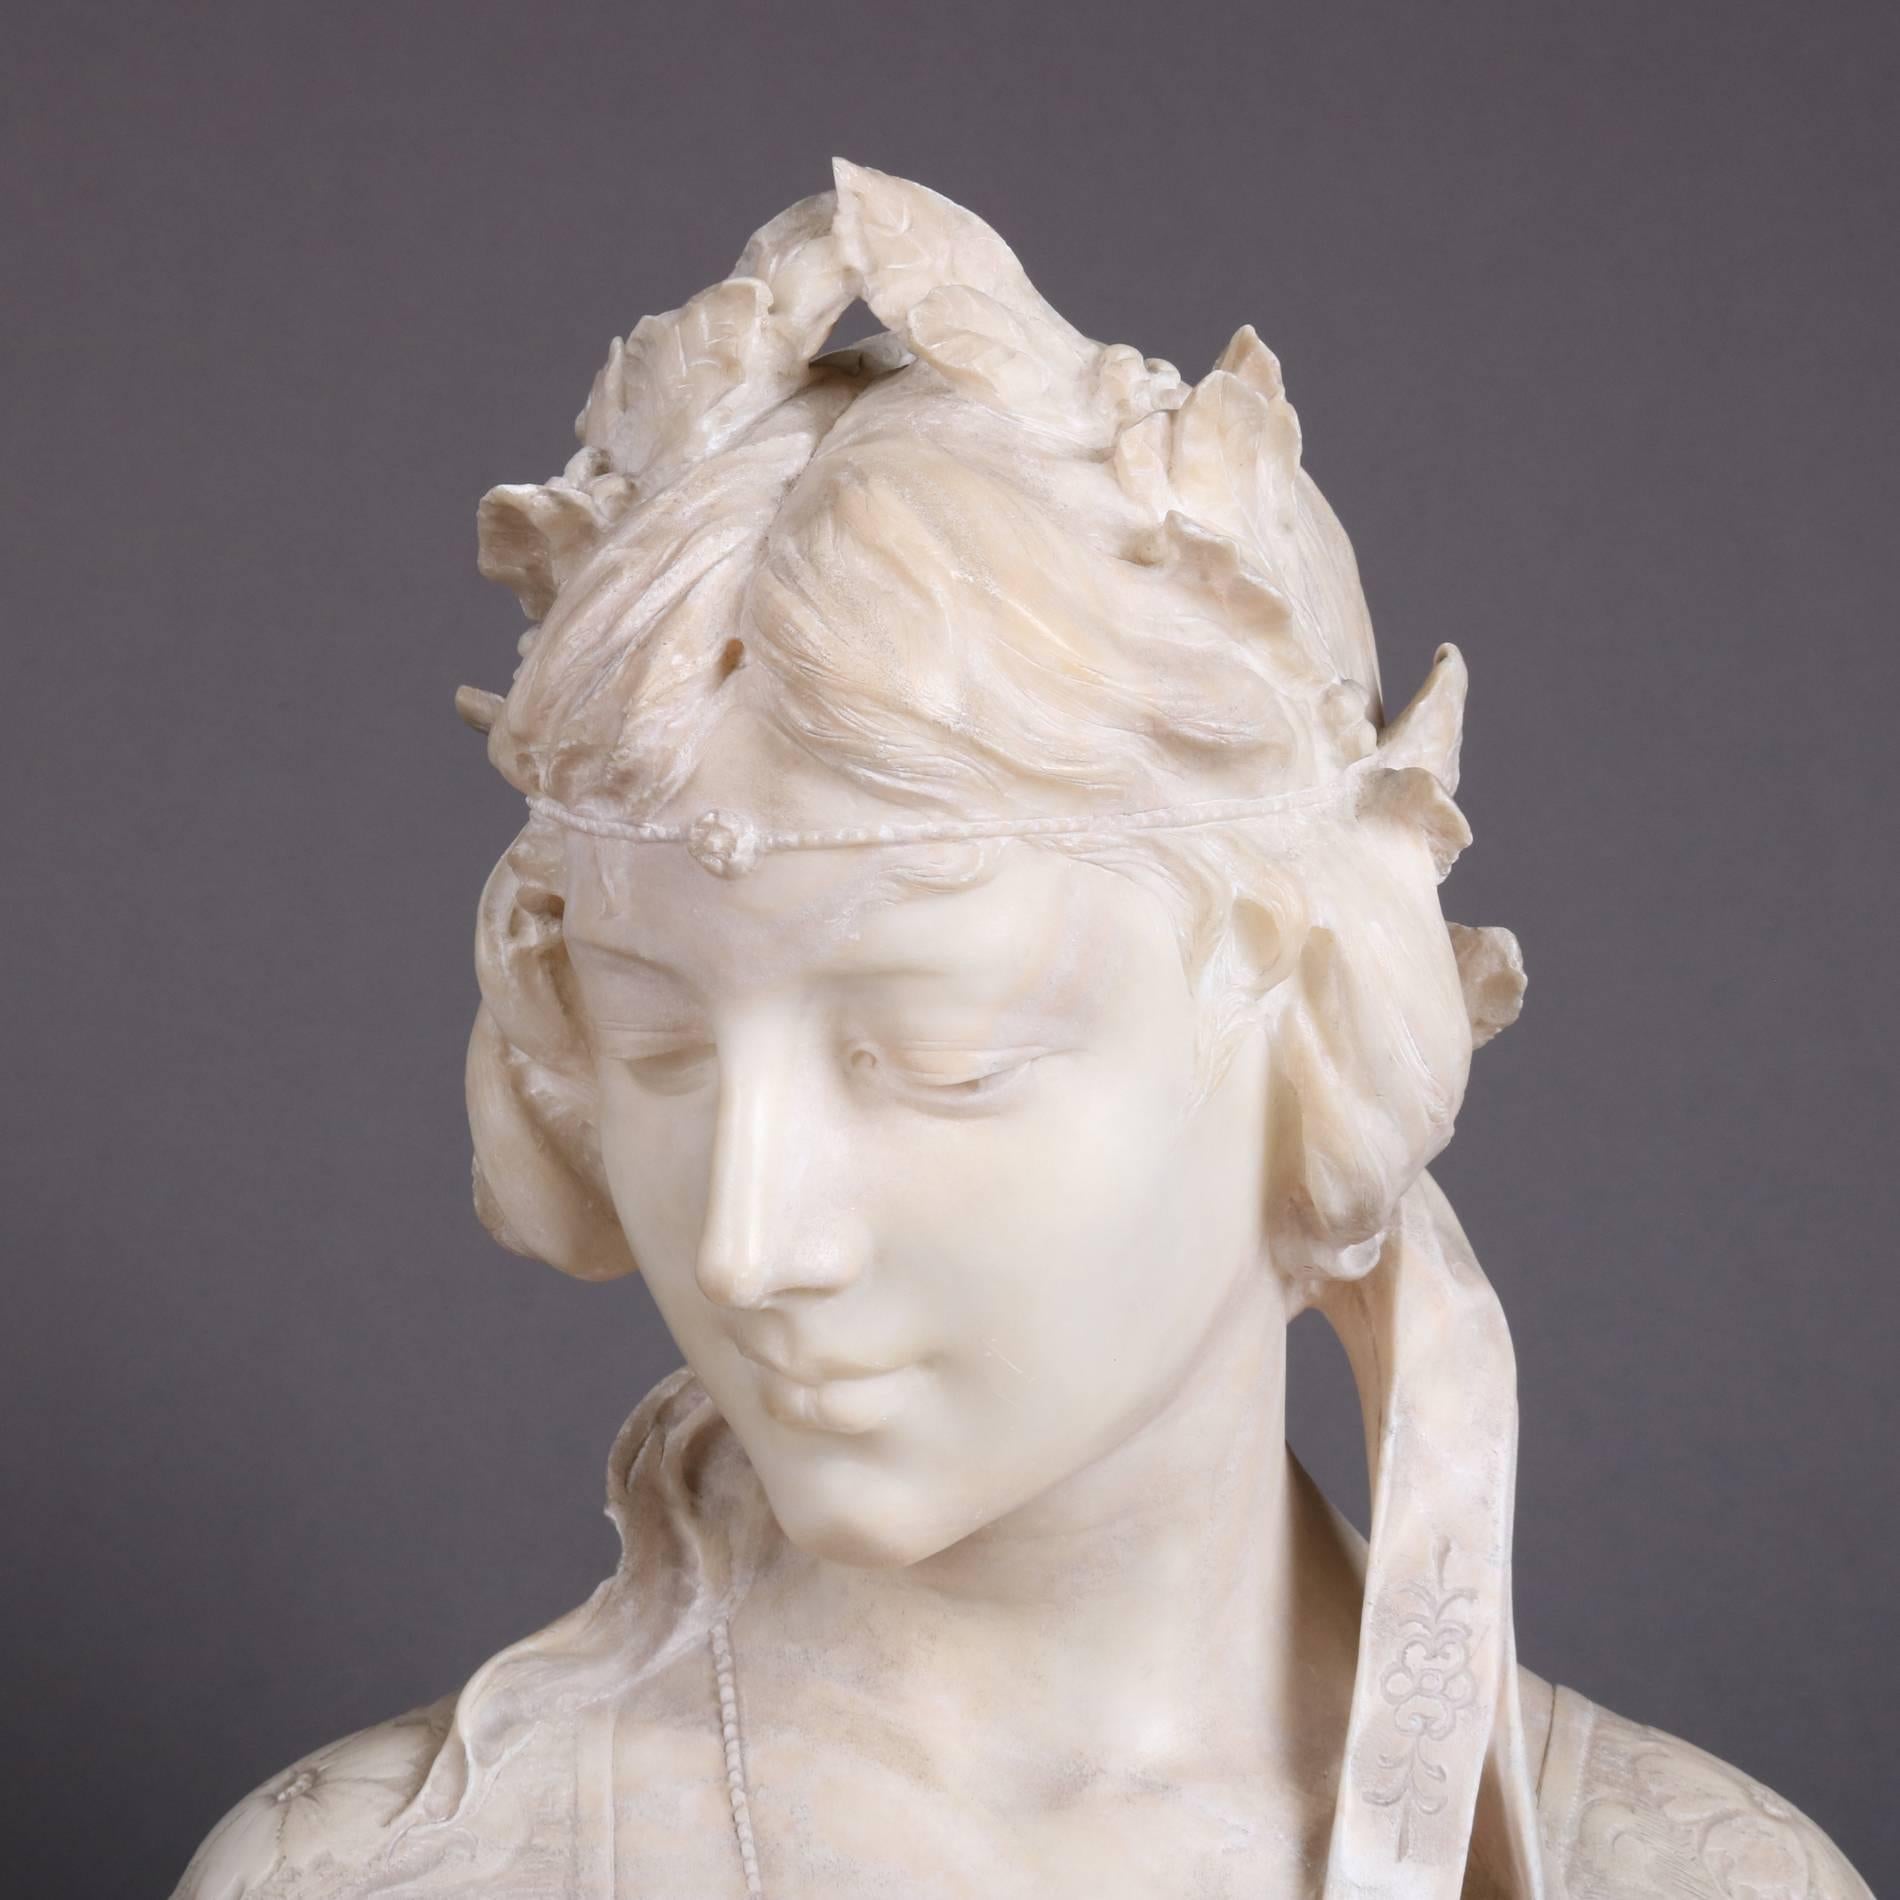 Antique neoclassic Italian highly detailed carved marble portrait sculpture Buste de femme (Bust of Woman) by Emilio Fiaschi (1858-1941), signed on back, display rod hole in base, 19th century

Measures: 19